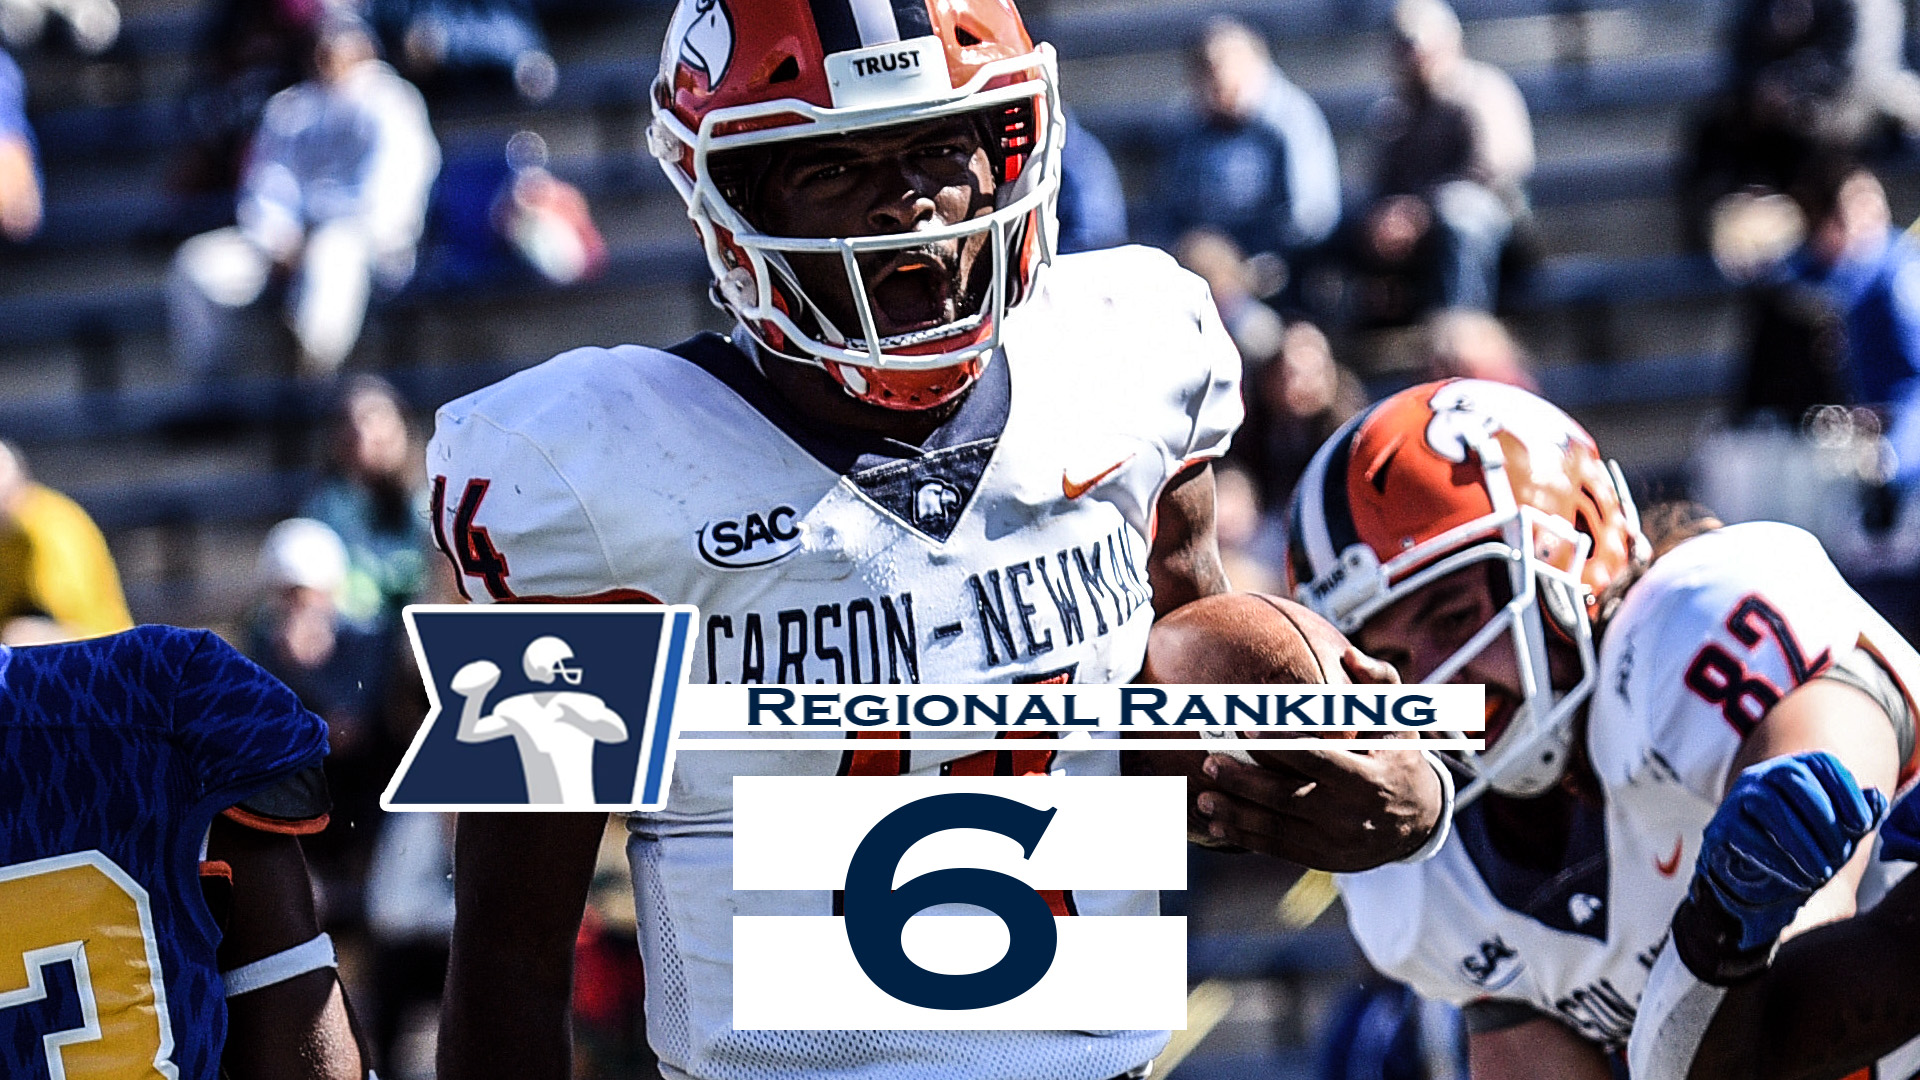 Carson-Newman holds steady in second region rankings